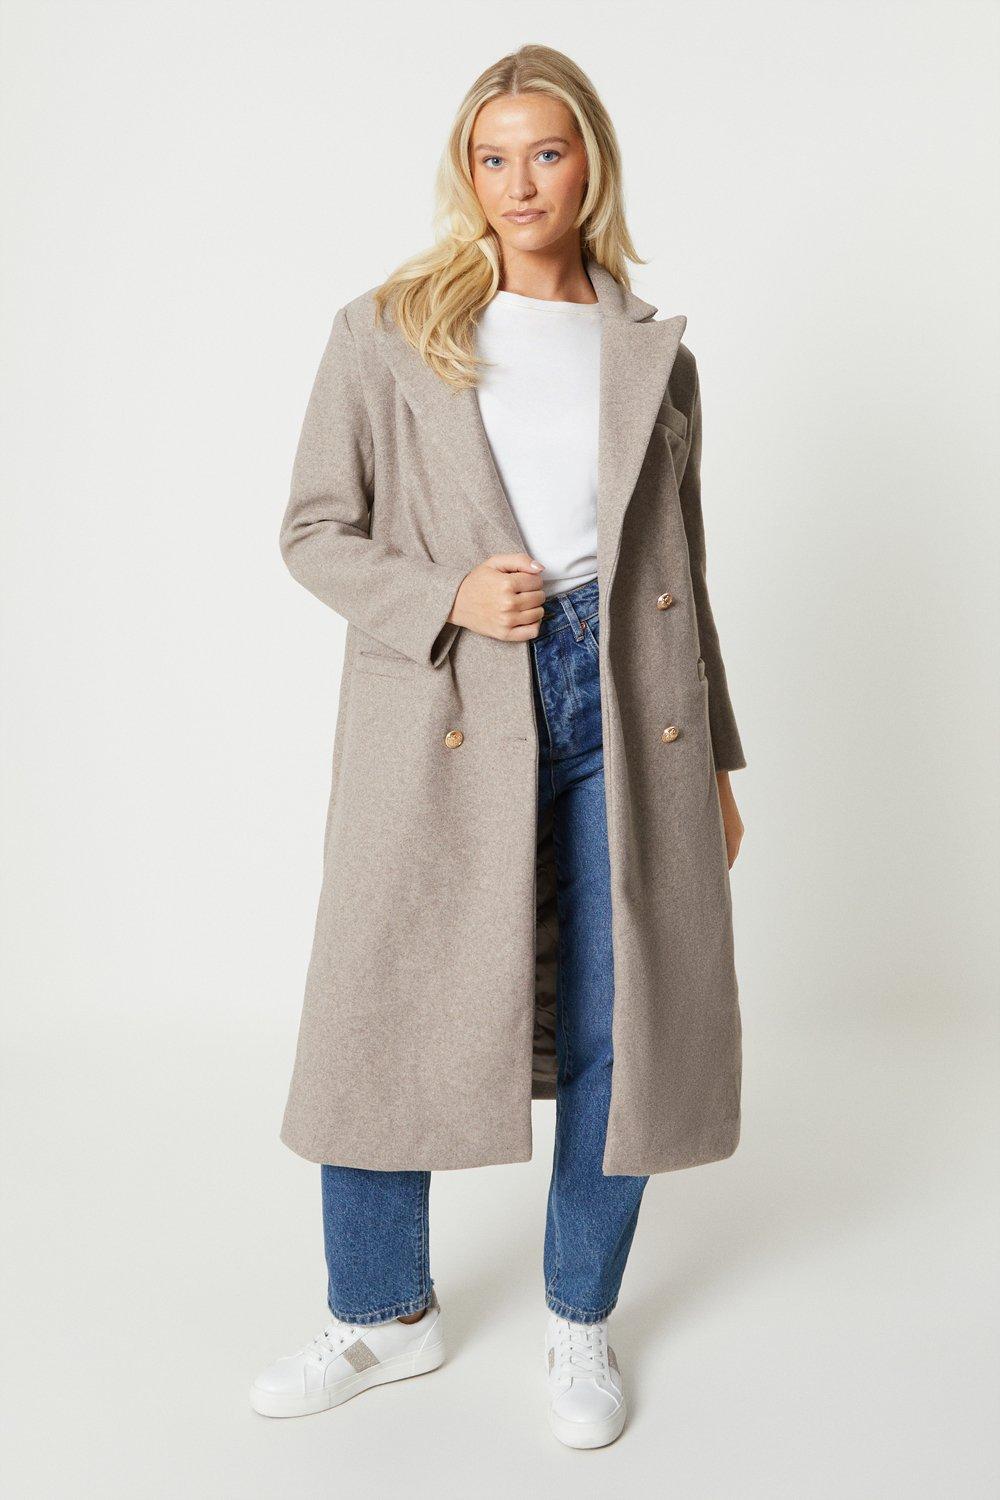 Women’s Longline Double Breasted Formal Coat - taupe - M